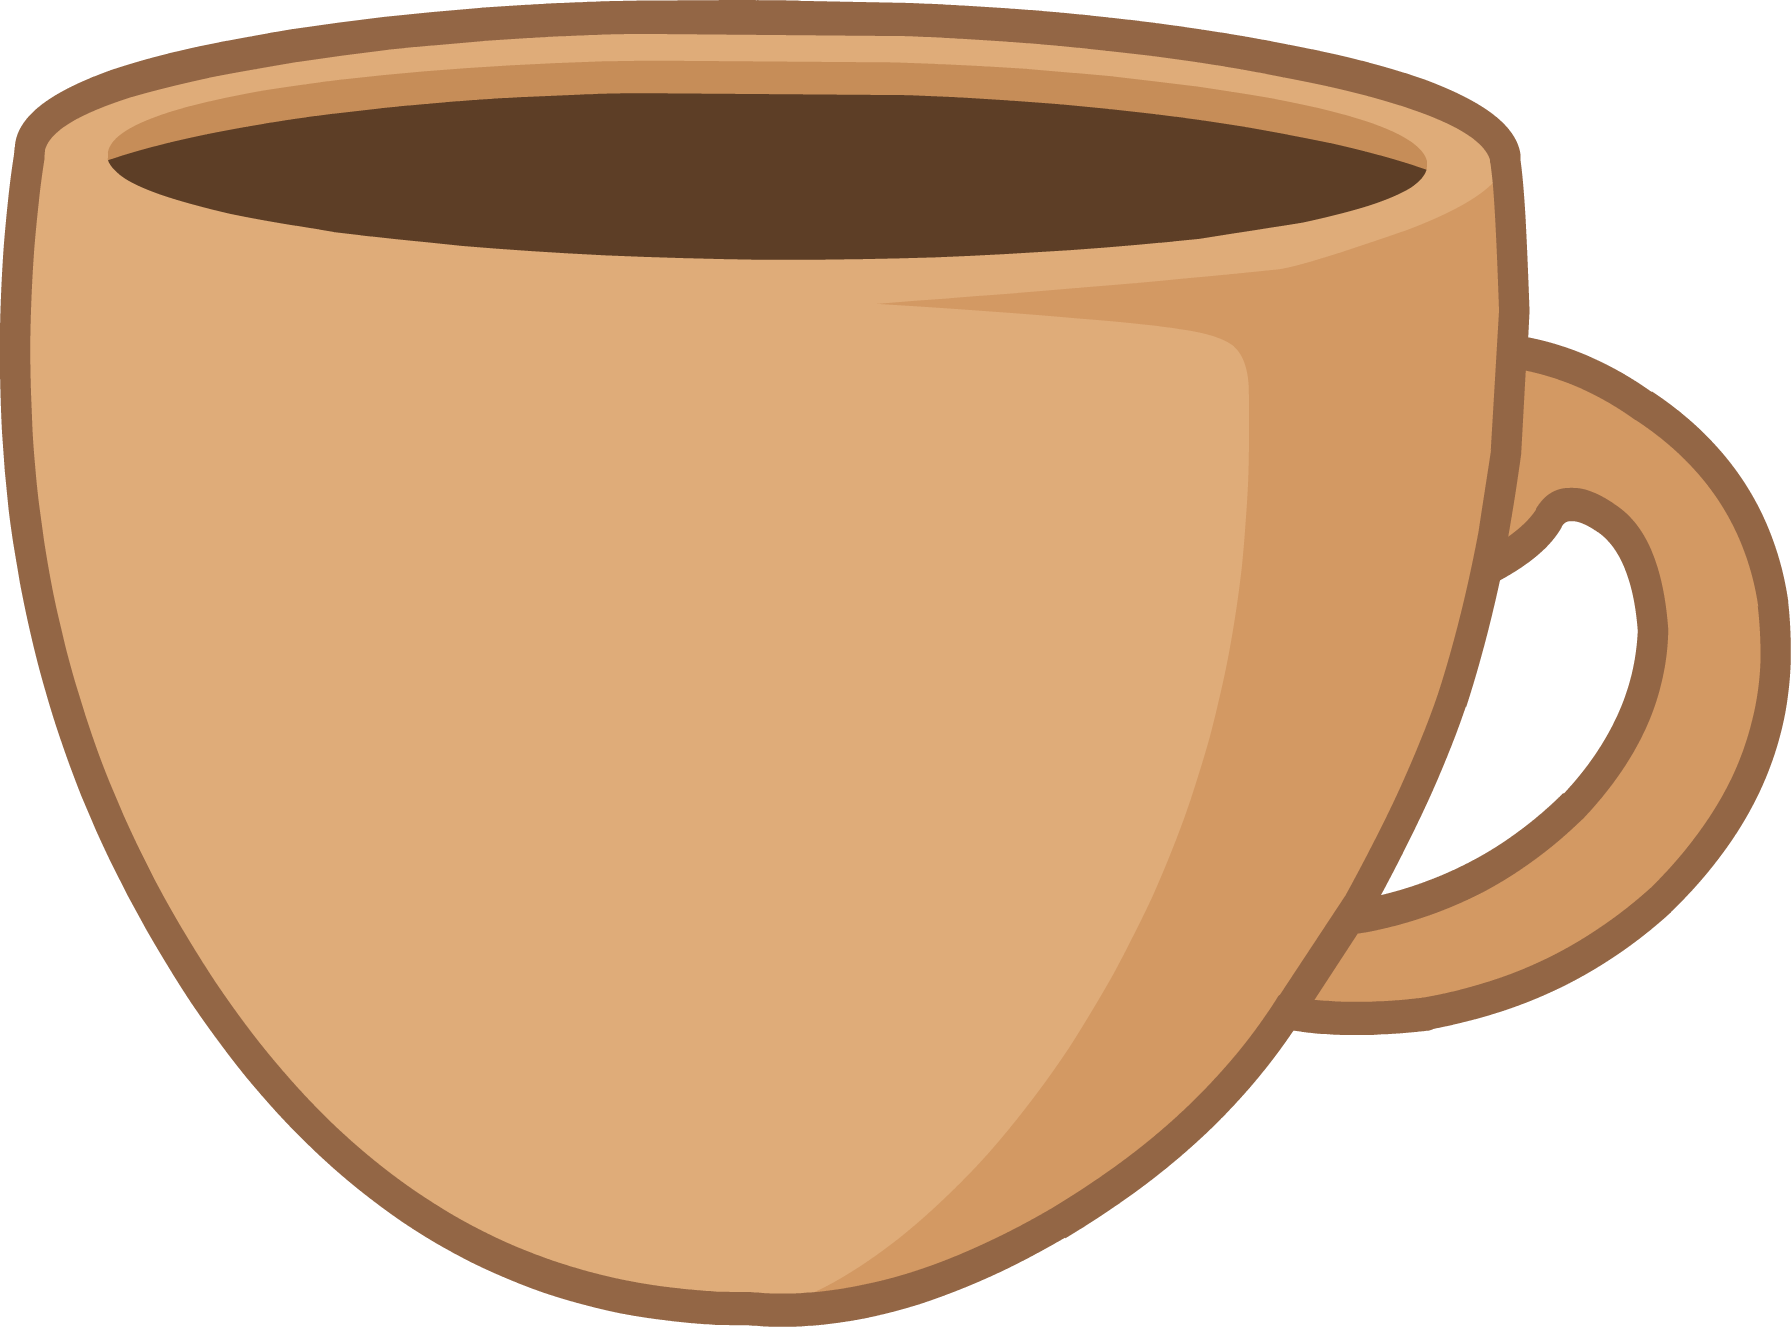 Clipart cup orange cup. Image coffee png object